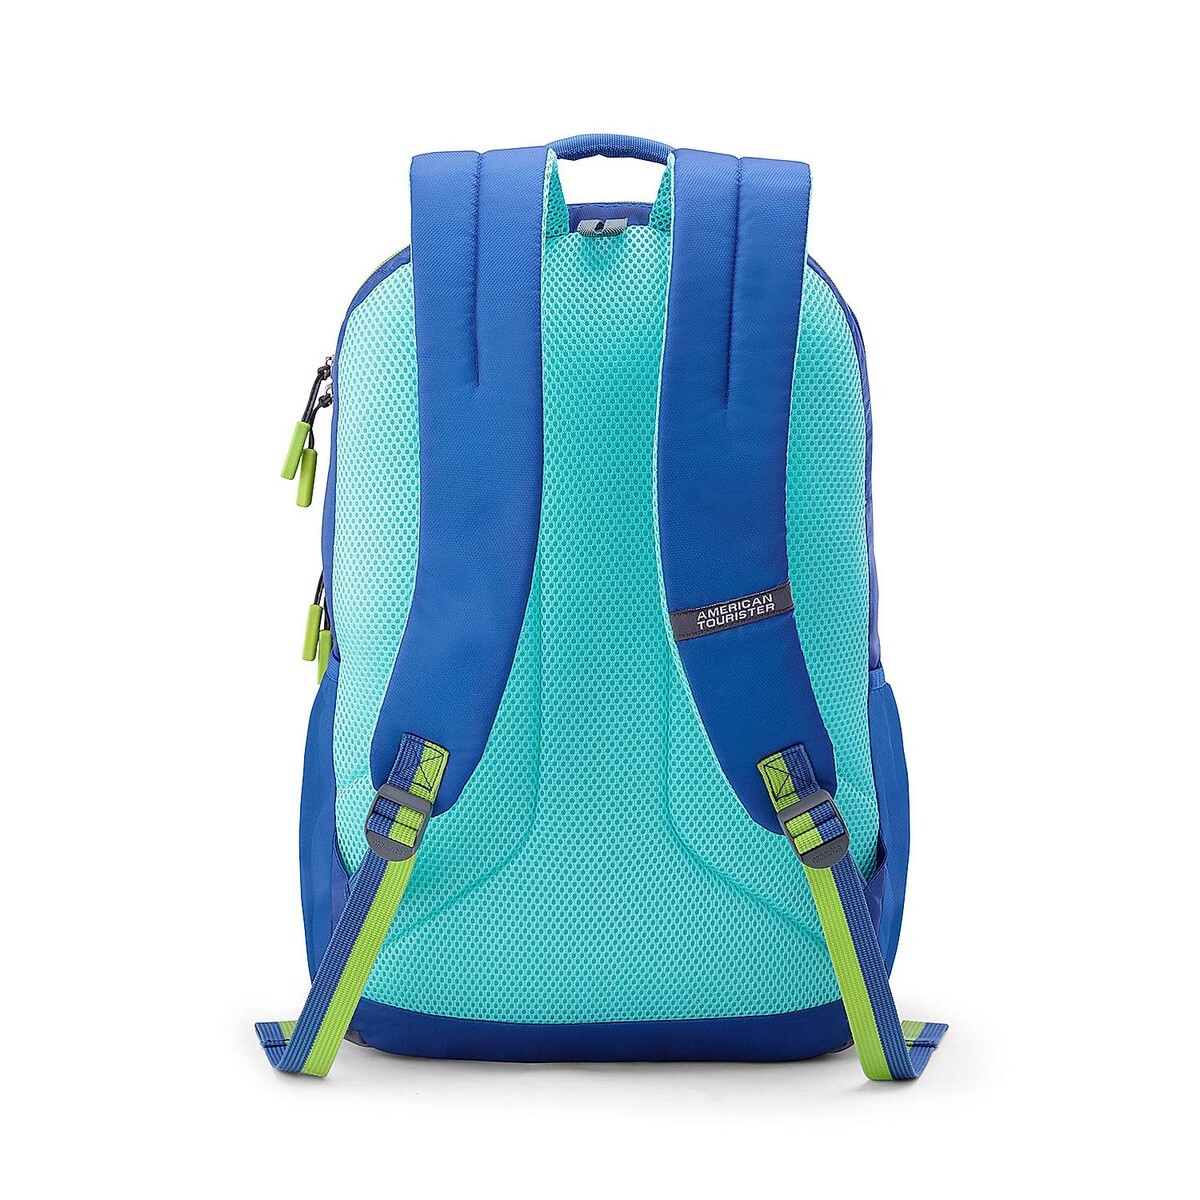 American Tourister Backpack Quad+ Bp01 Blue